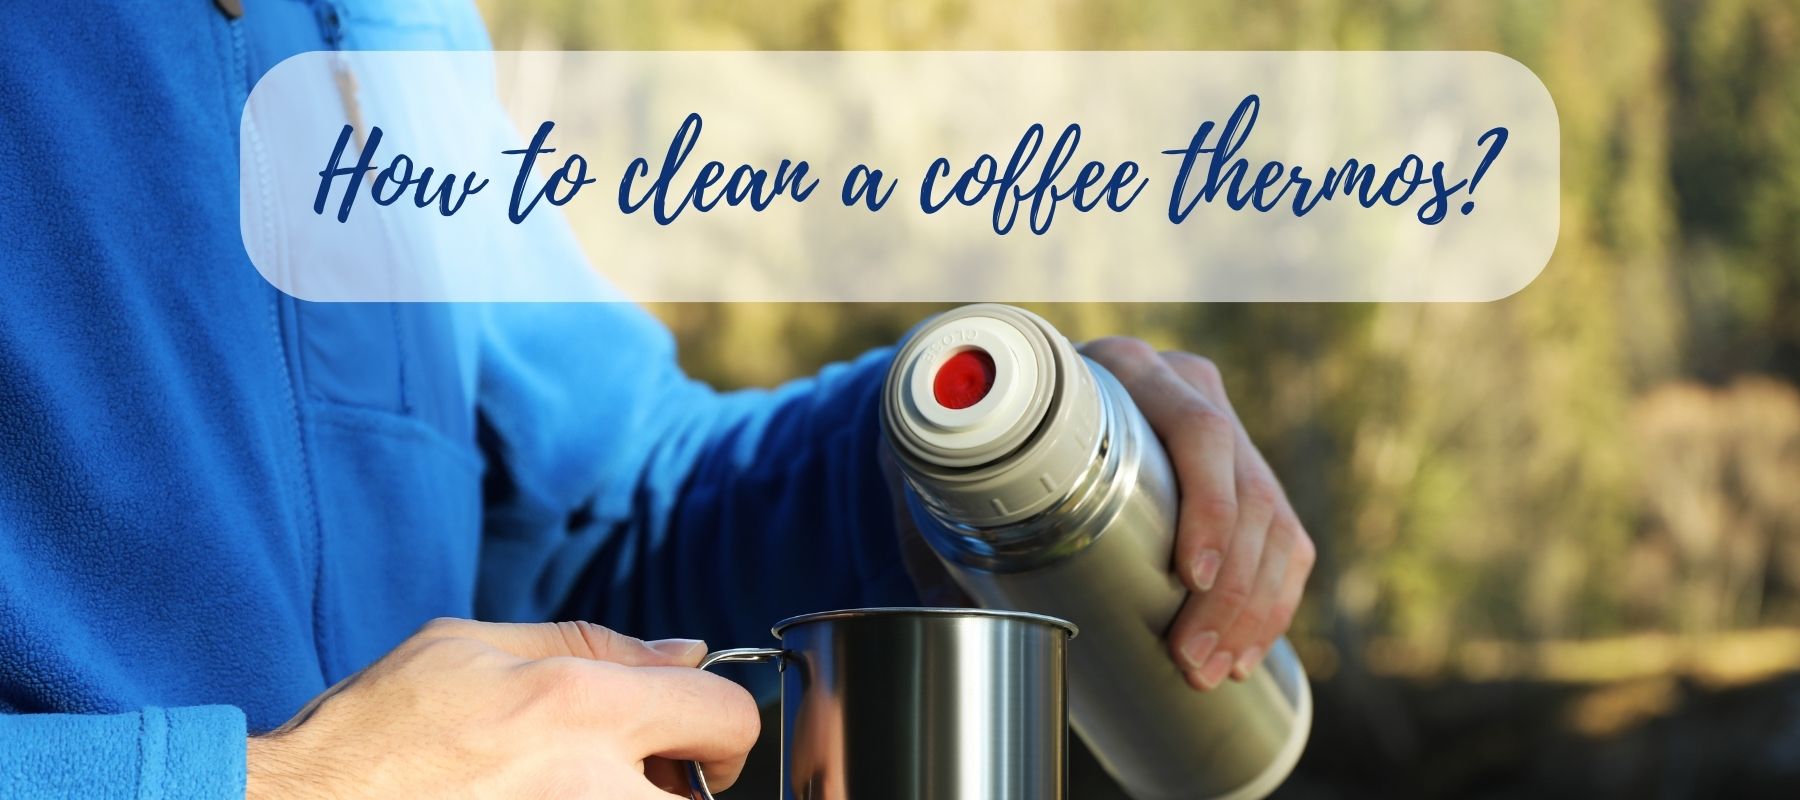 How-to-clean-a-coffee-thermos